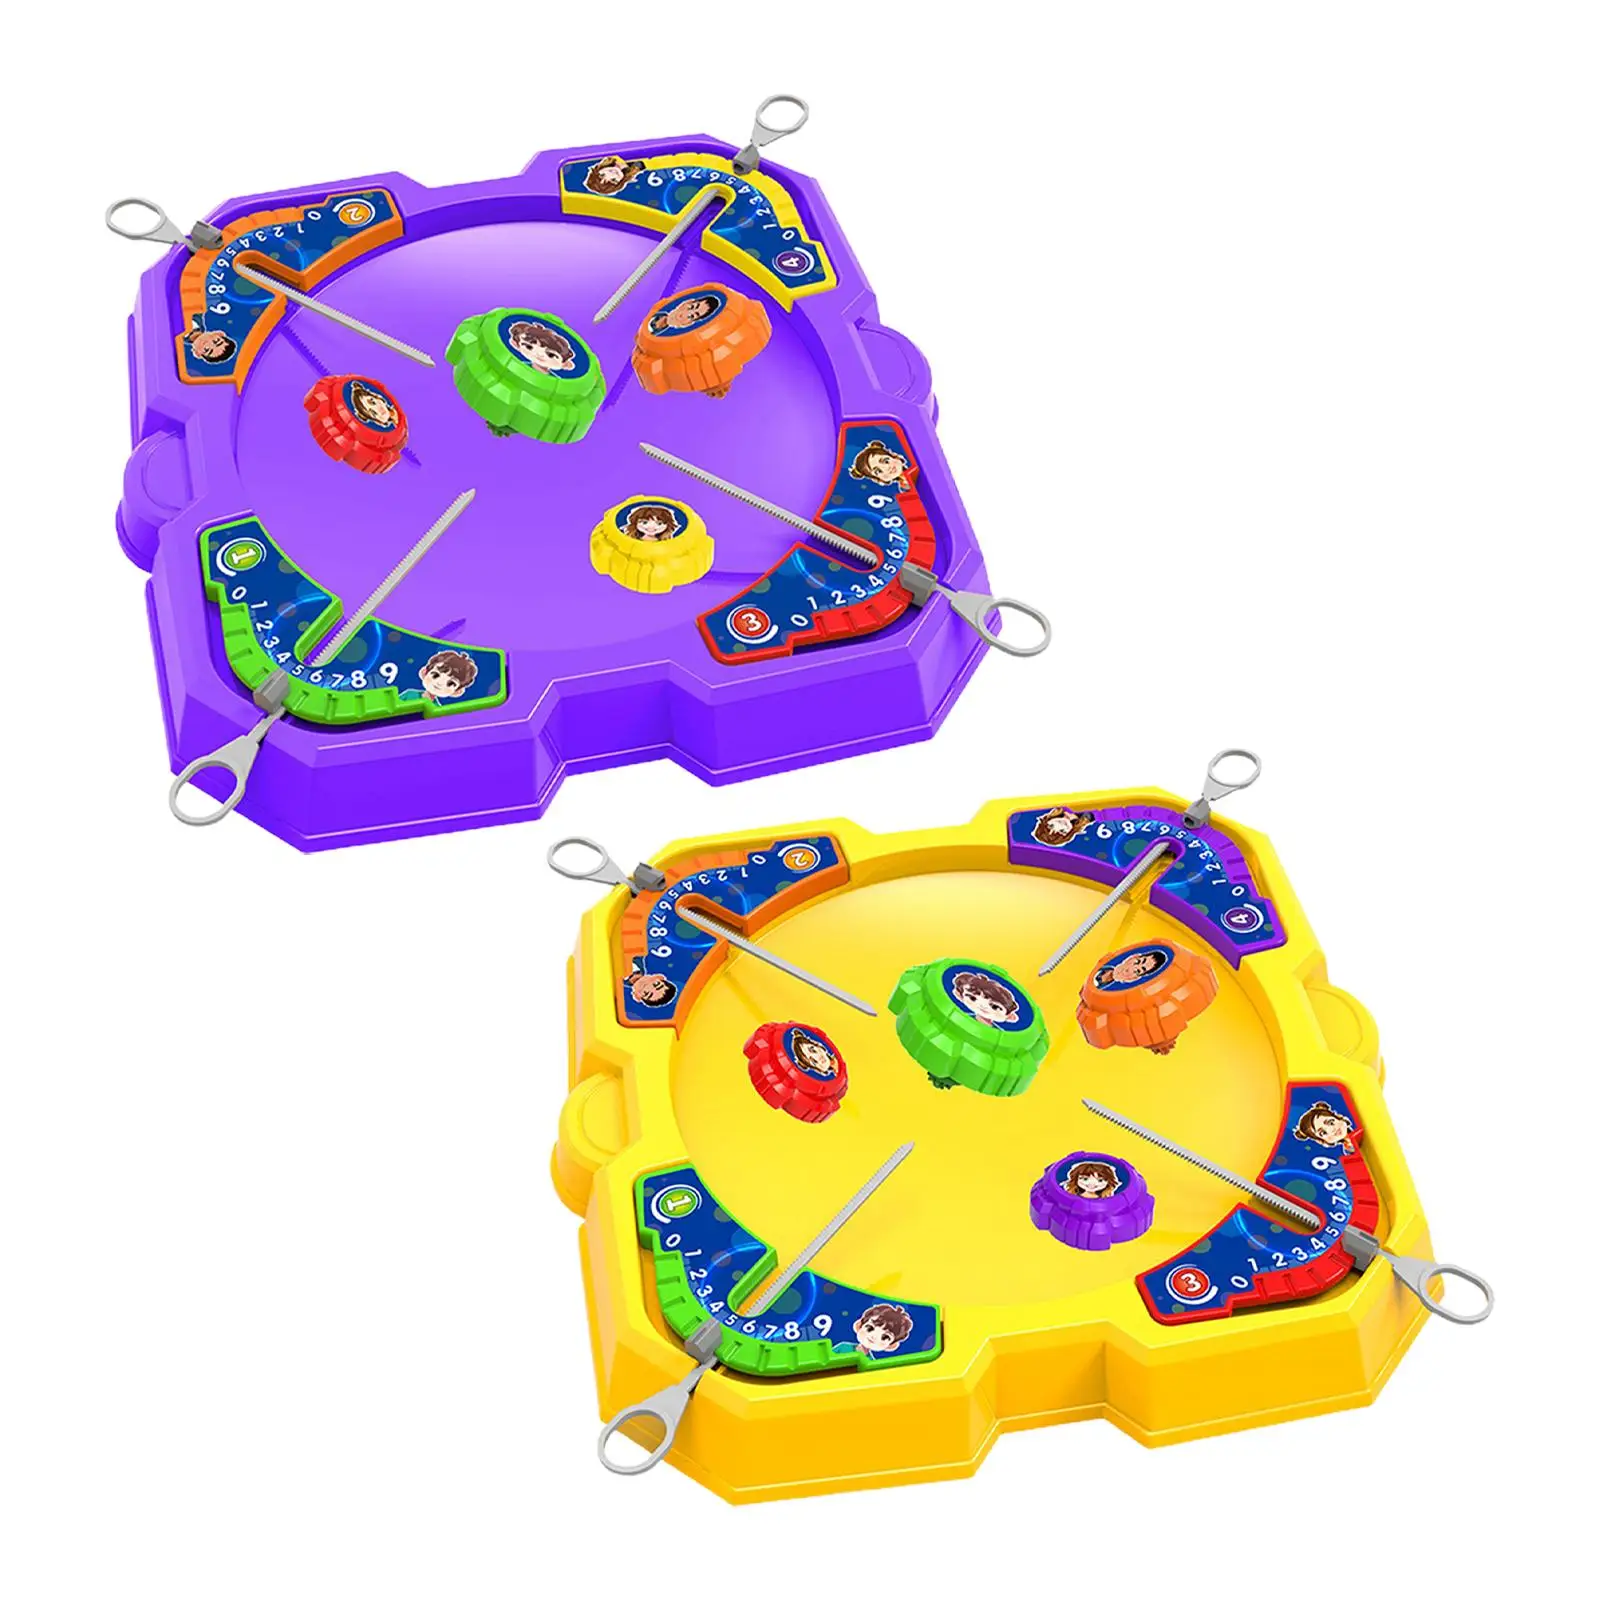 Gyro Toy Set Competitive Games Developmental Toy Drop Resistant Foursome Pullout Gyroscope for Kindergarten Desktop Holiday Kids